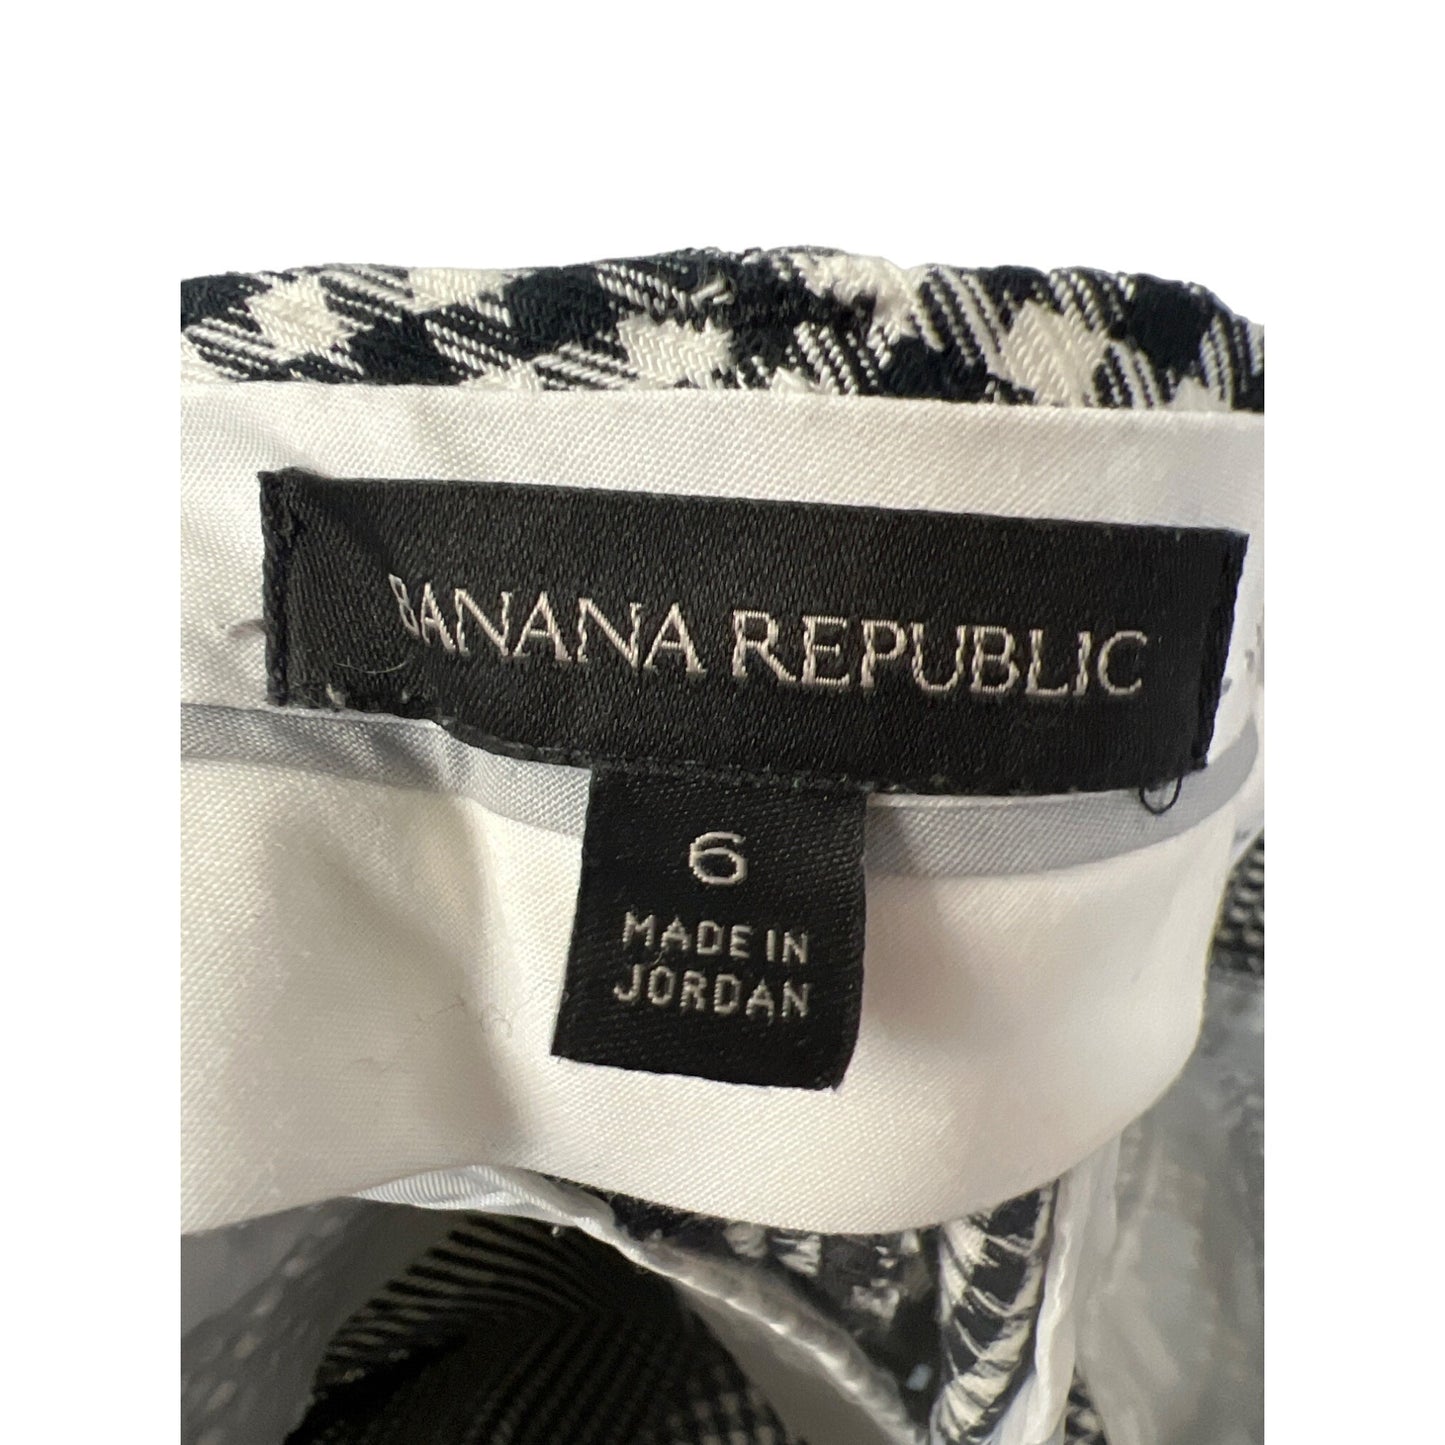 Banana Republic Black and White Houndstooth Sloan Fit Pants